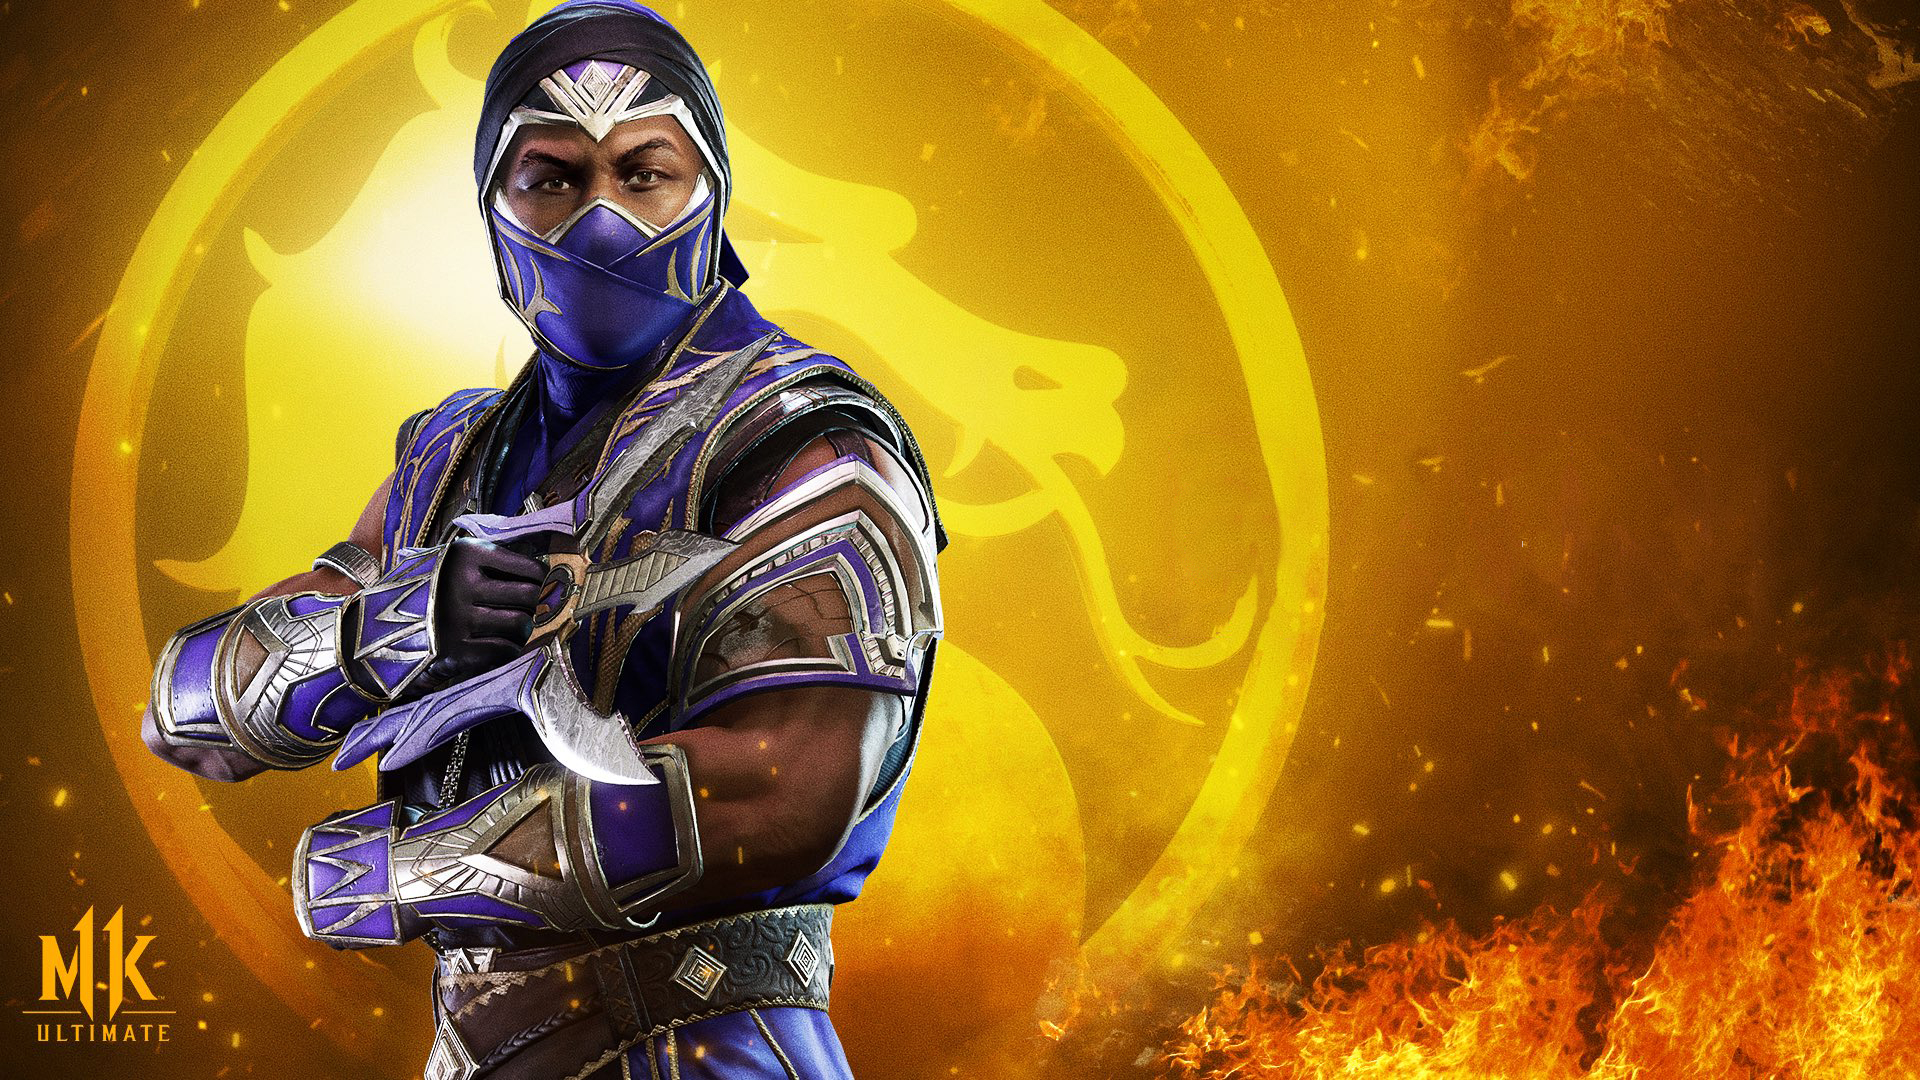 download mortal kombat 11 for android